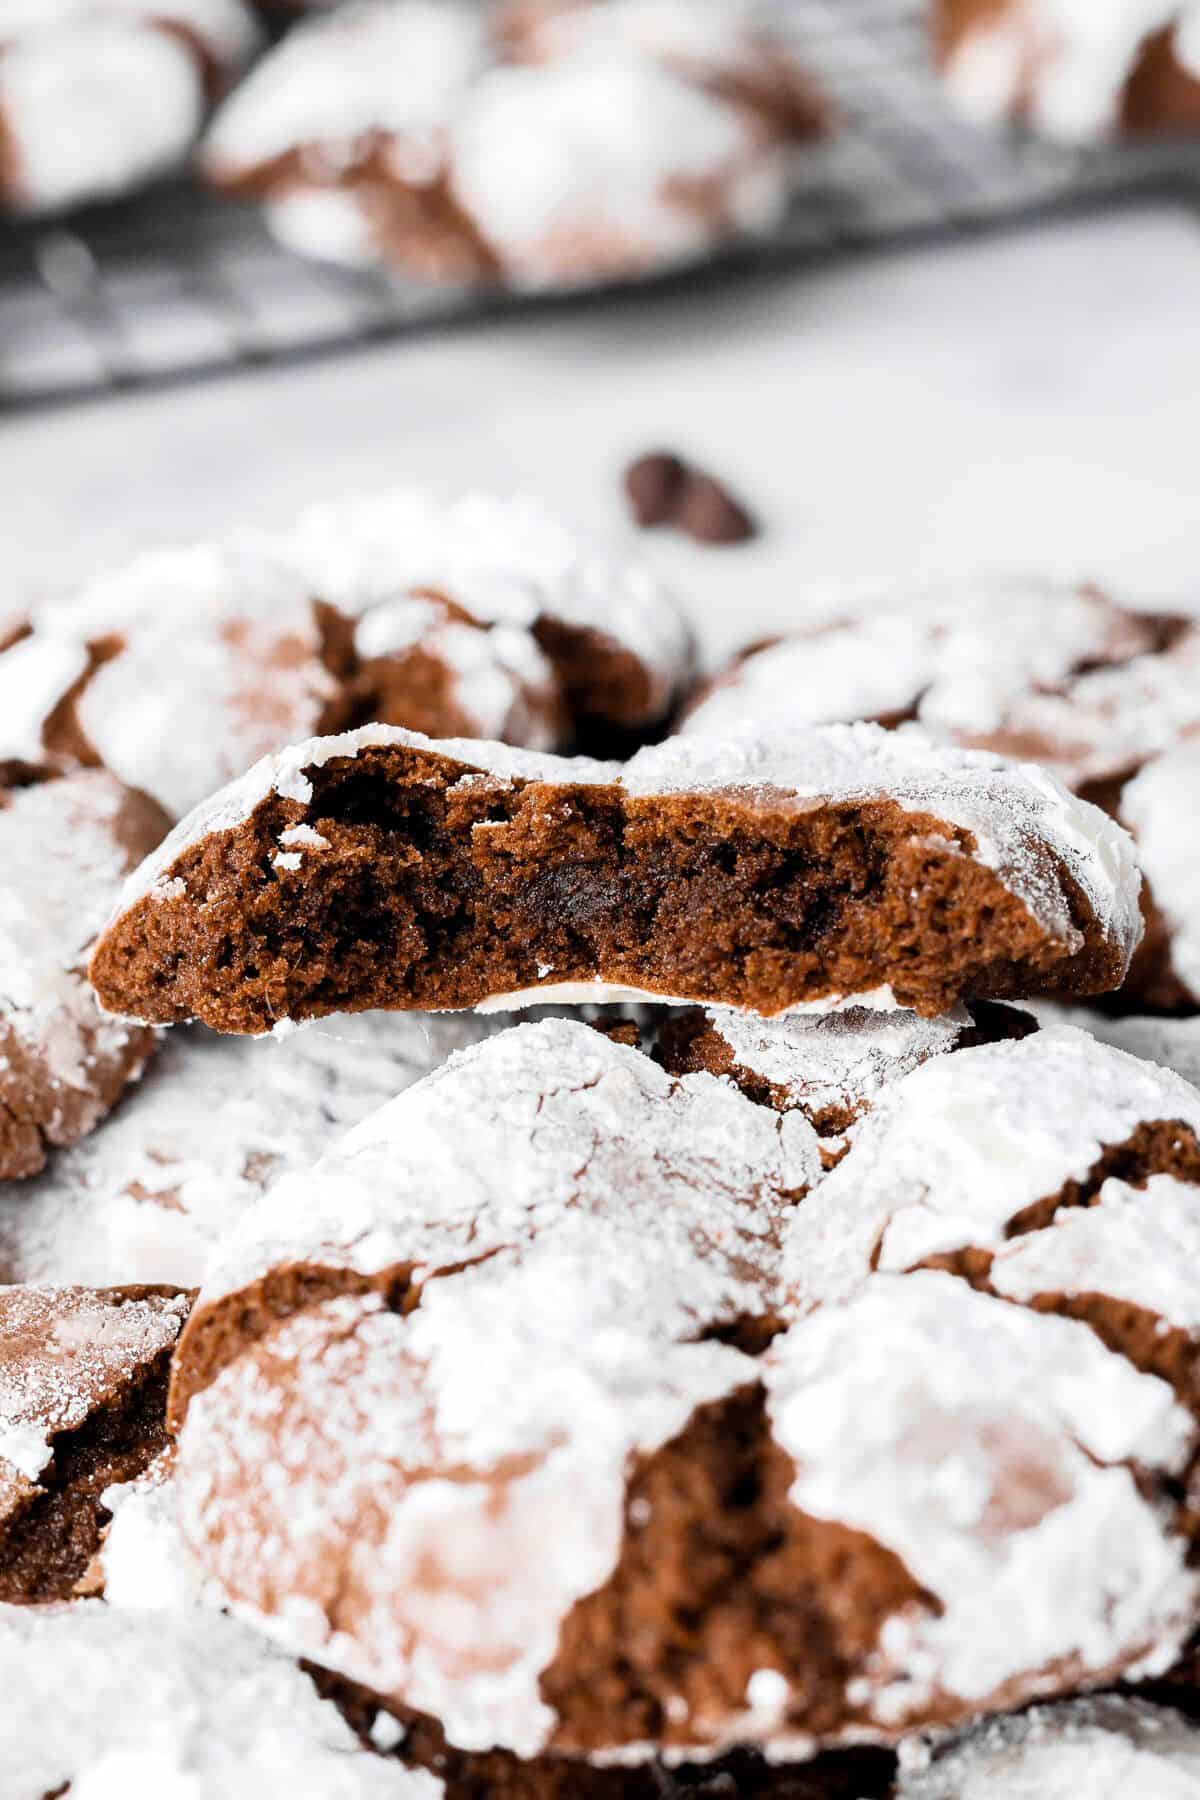 Close up of a chocolate crinkle cookie with a bite taken out to show the inside texture.